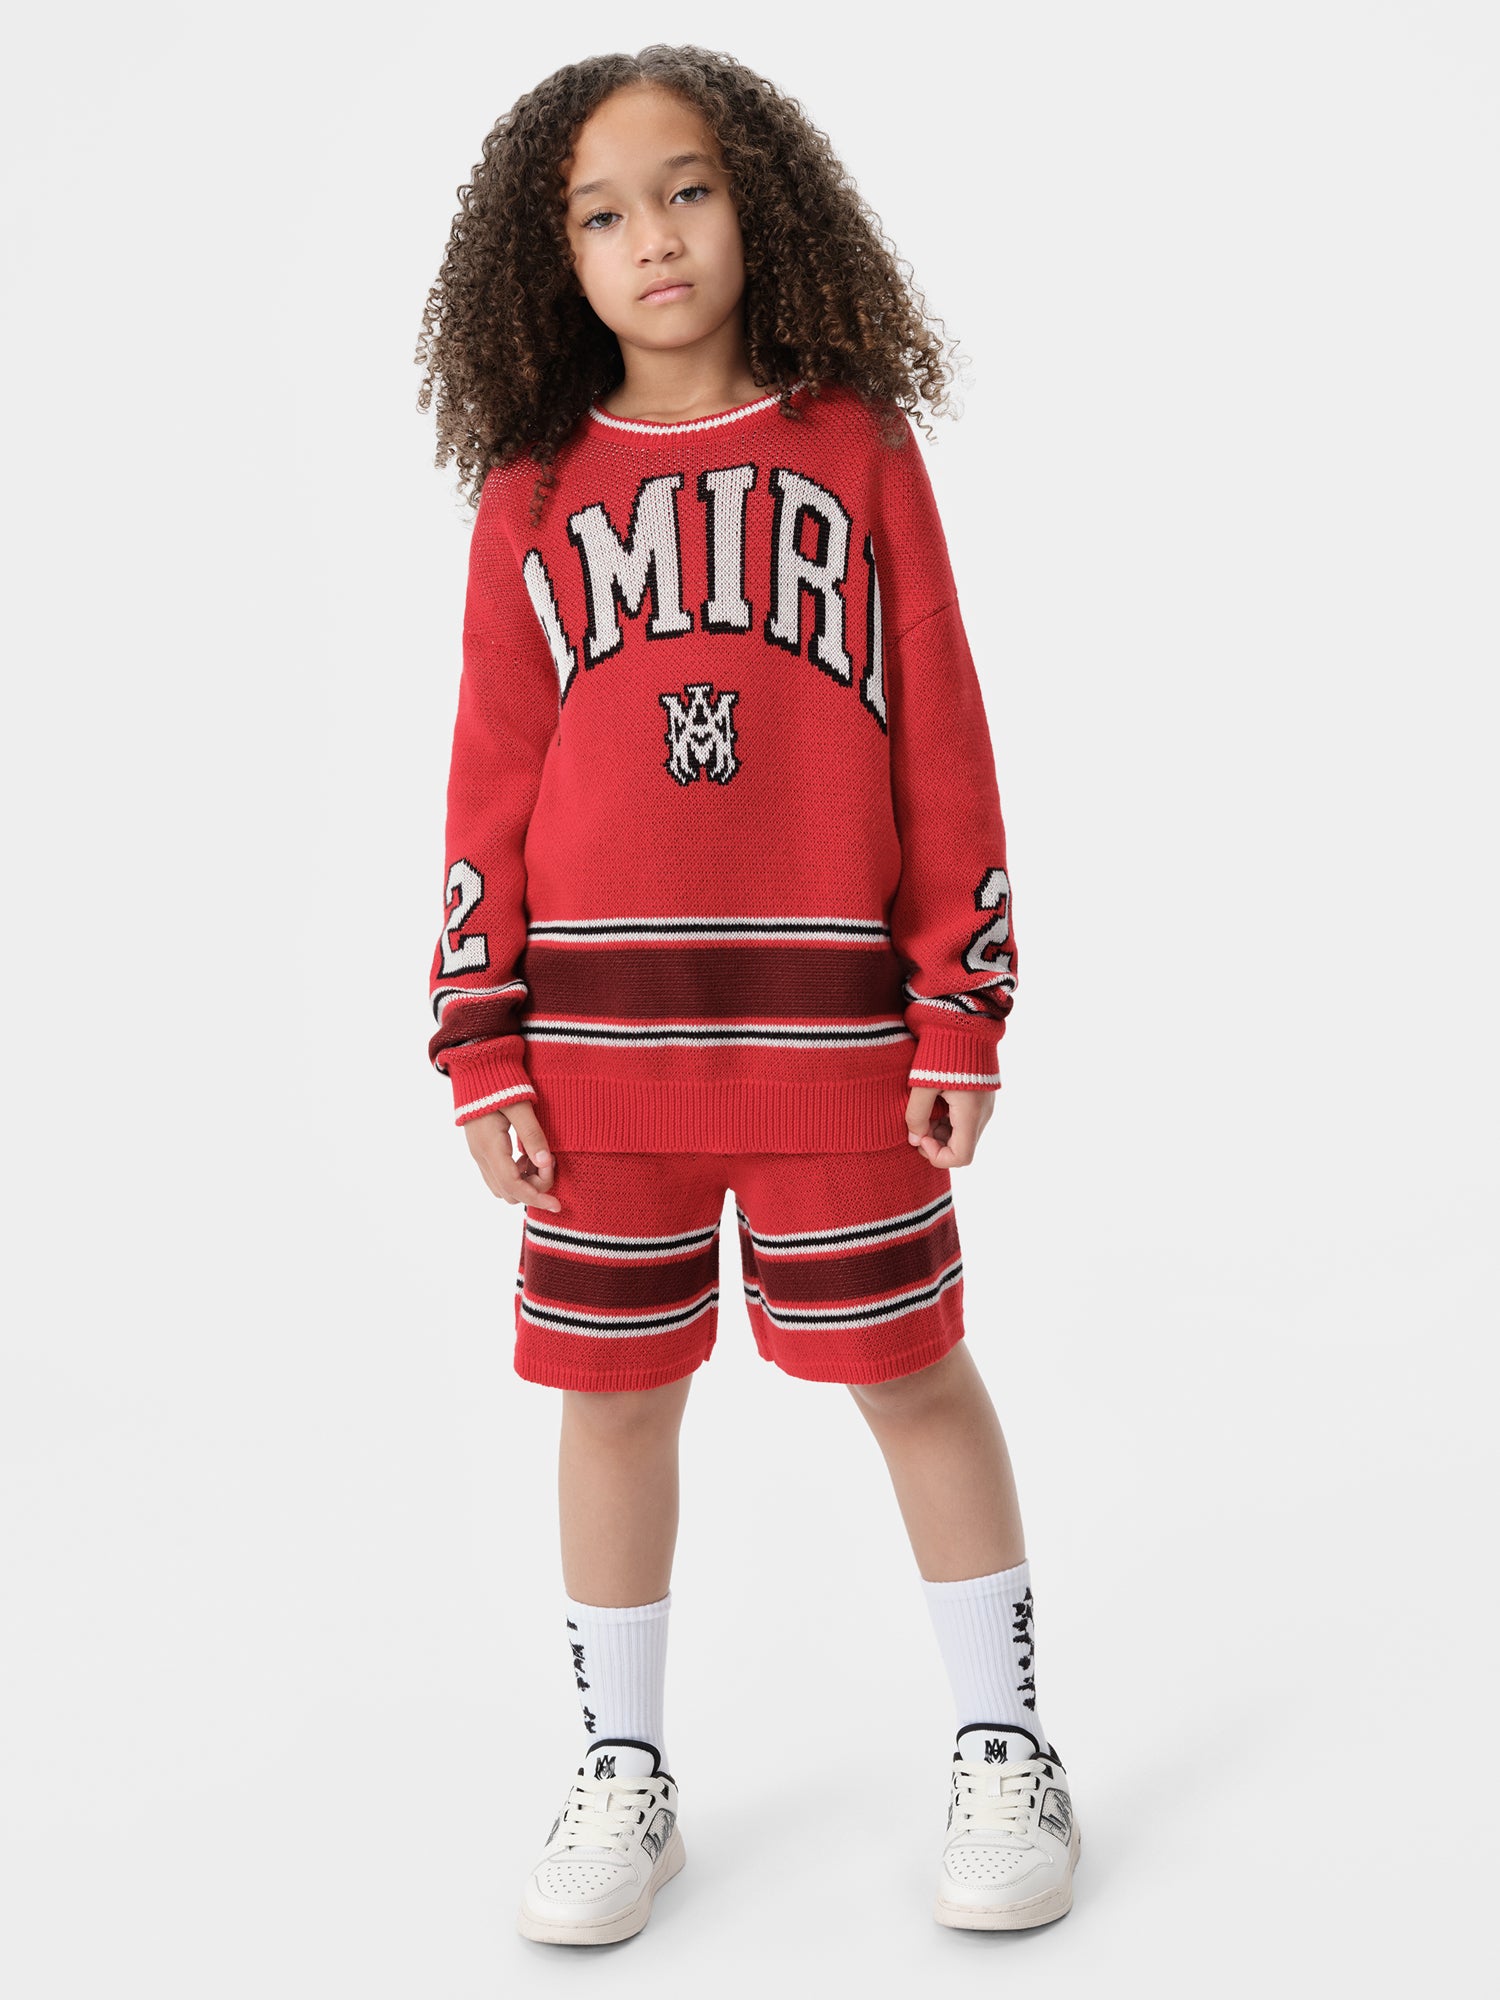 Product KIDS - KIDS' MA STRIPE SHORT - Red featured image